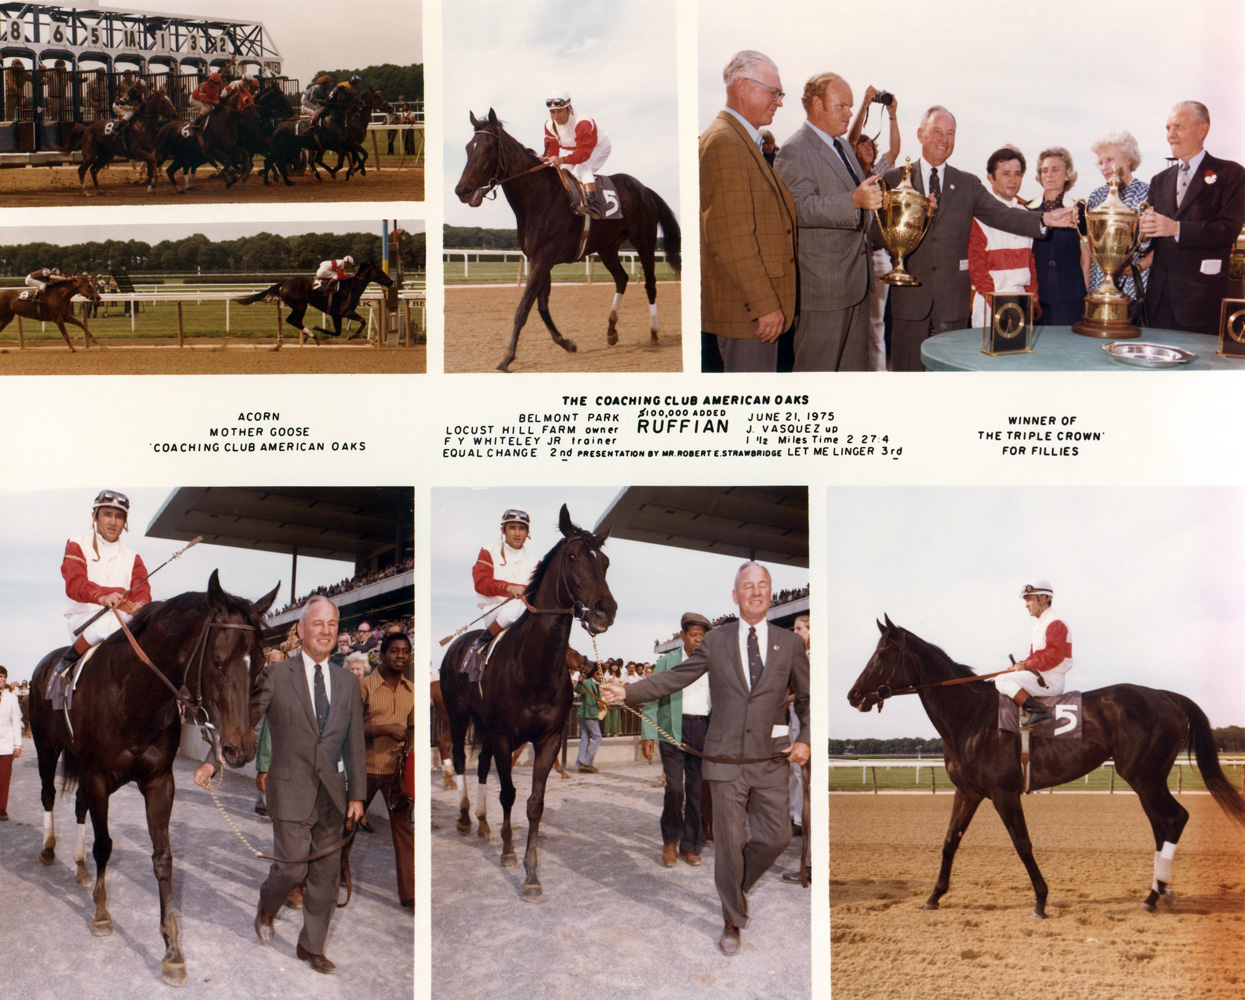 Win composite photograph from the 1975 Coaching Club American Oaks at Belmont, won by Ruffian (Jacinto Vasquez up), trained by Frank Whiteley, Jr. (NYRA/Museum Collection)